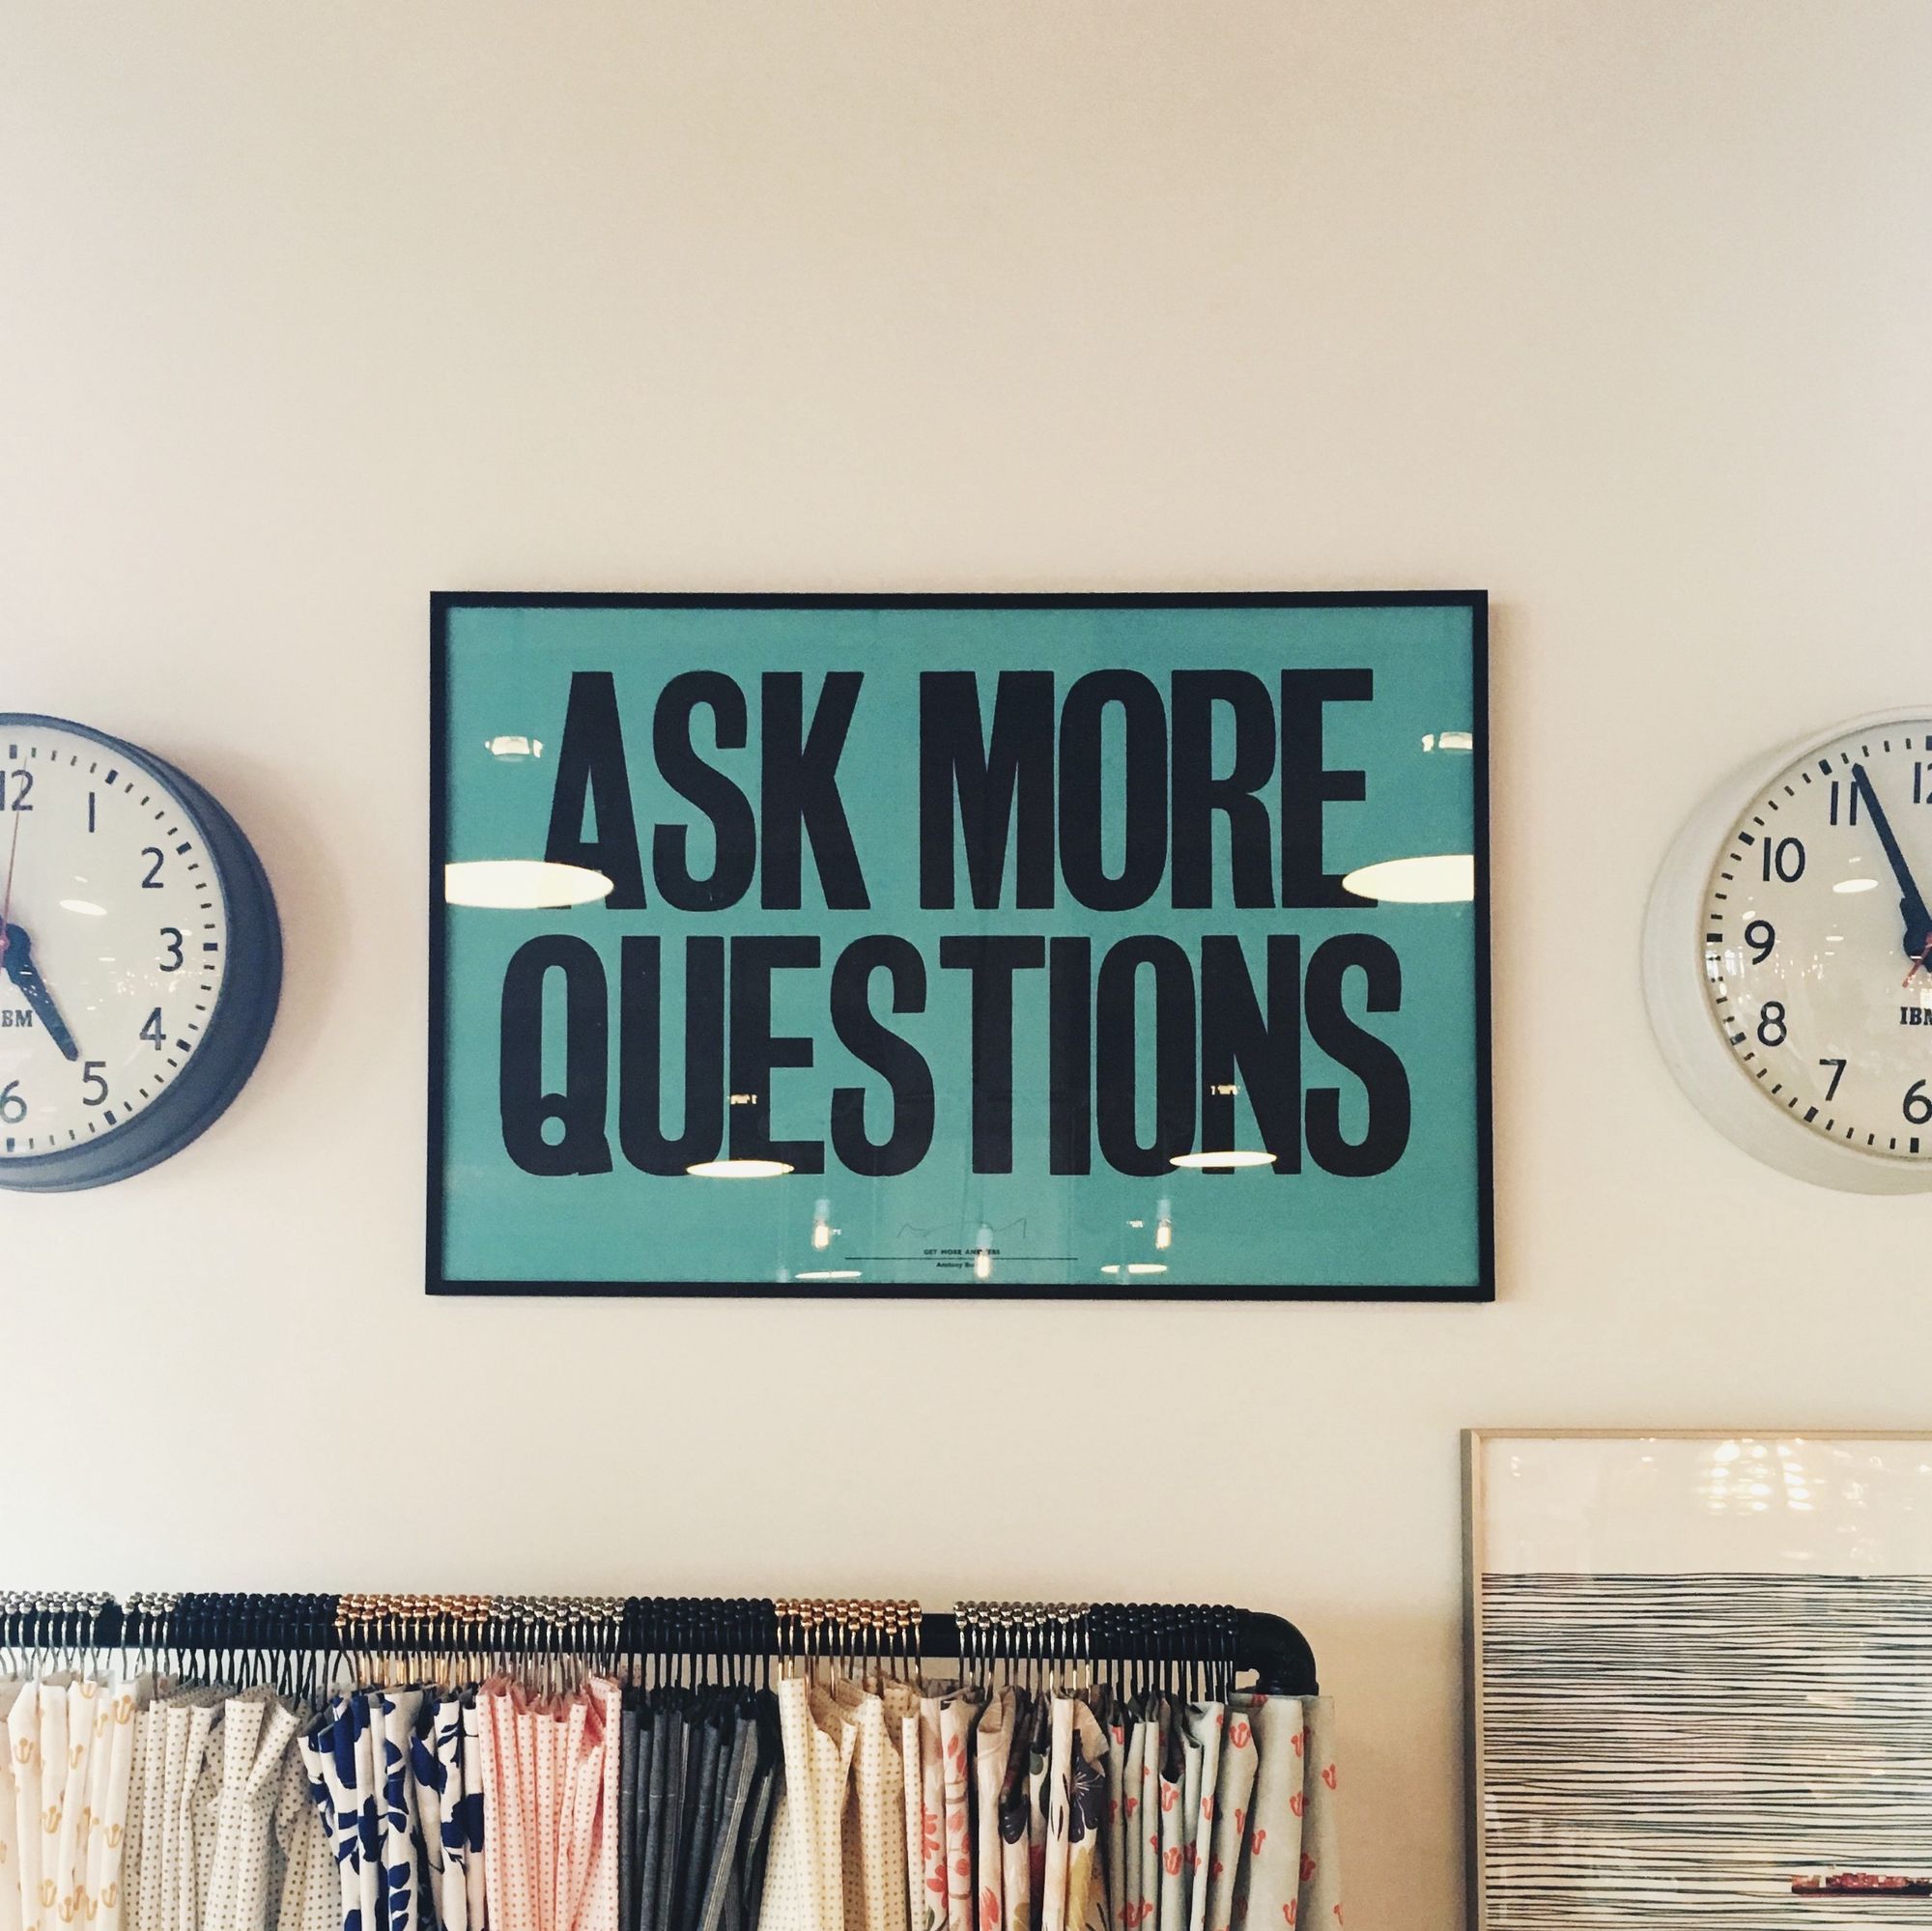 A teal colored graphic poster with the text "Ask More Questions" hanging on a beige wall between two IBM branded clocks